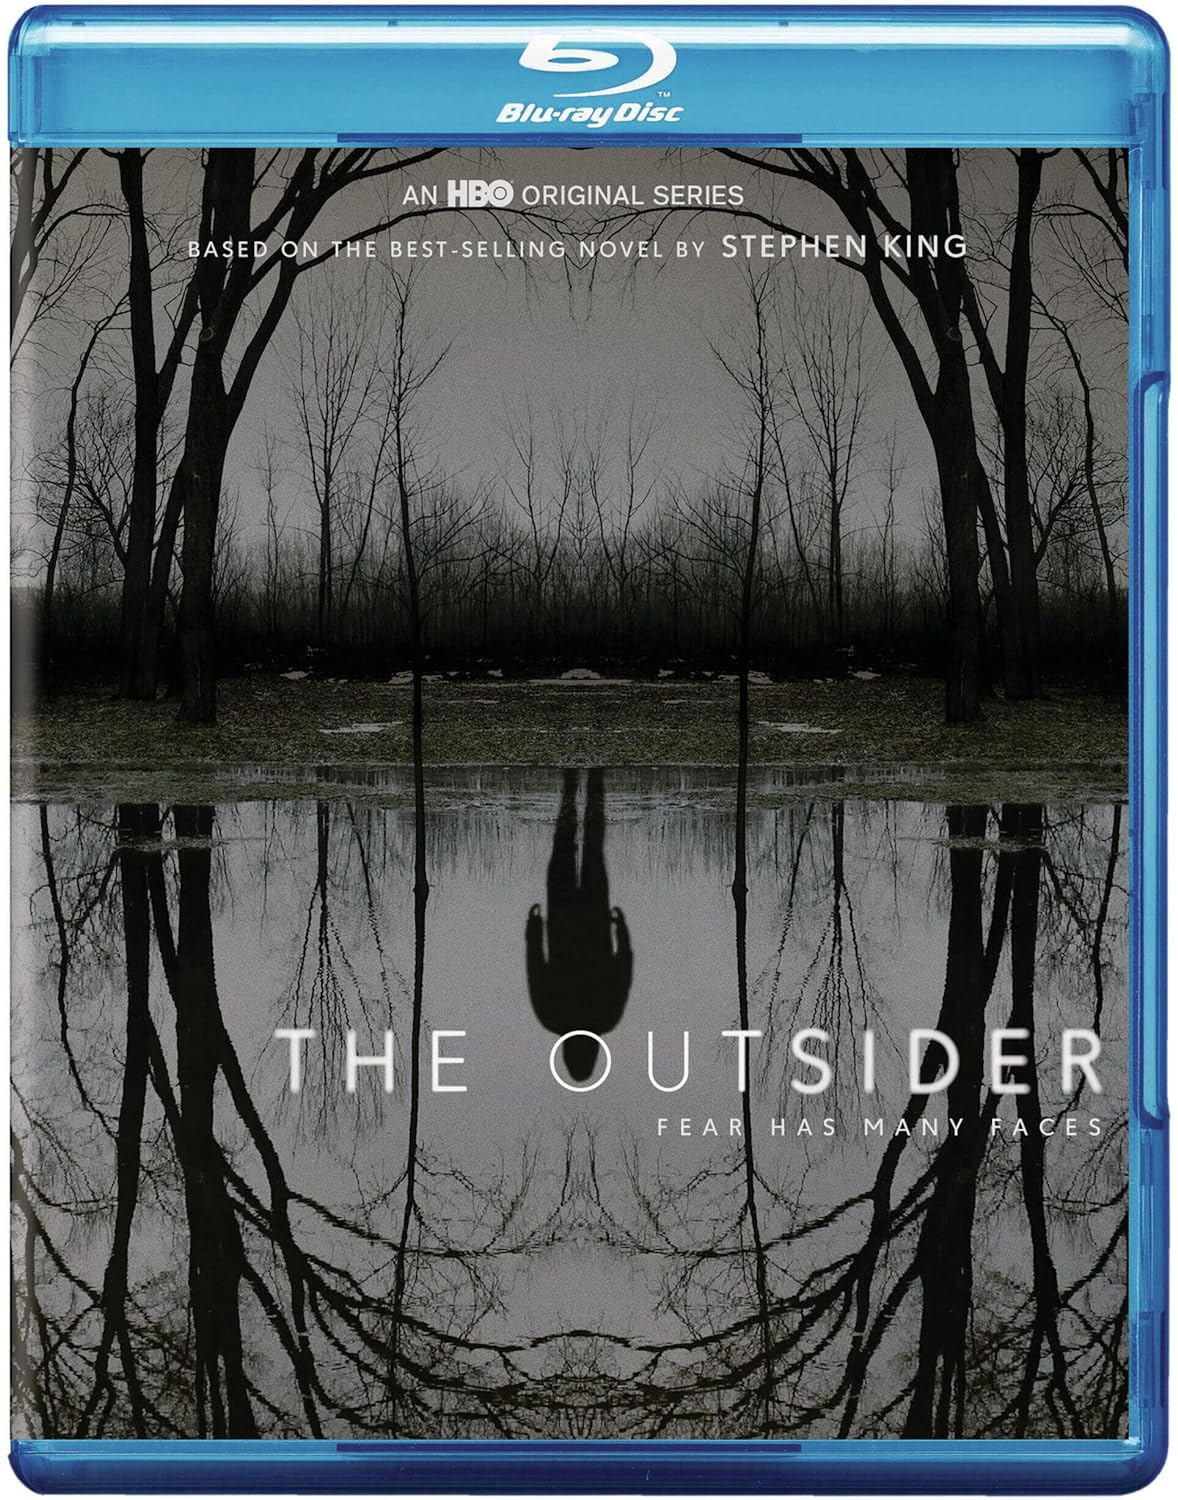 The Outsider: First Season